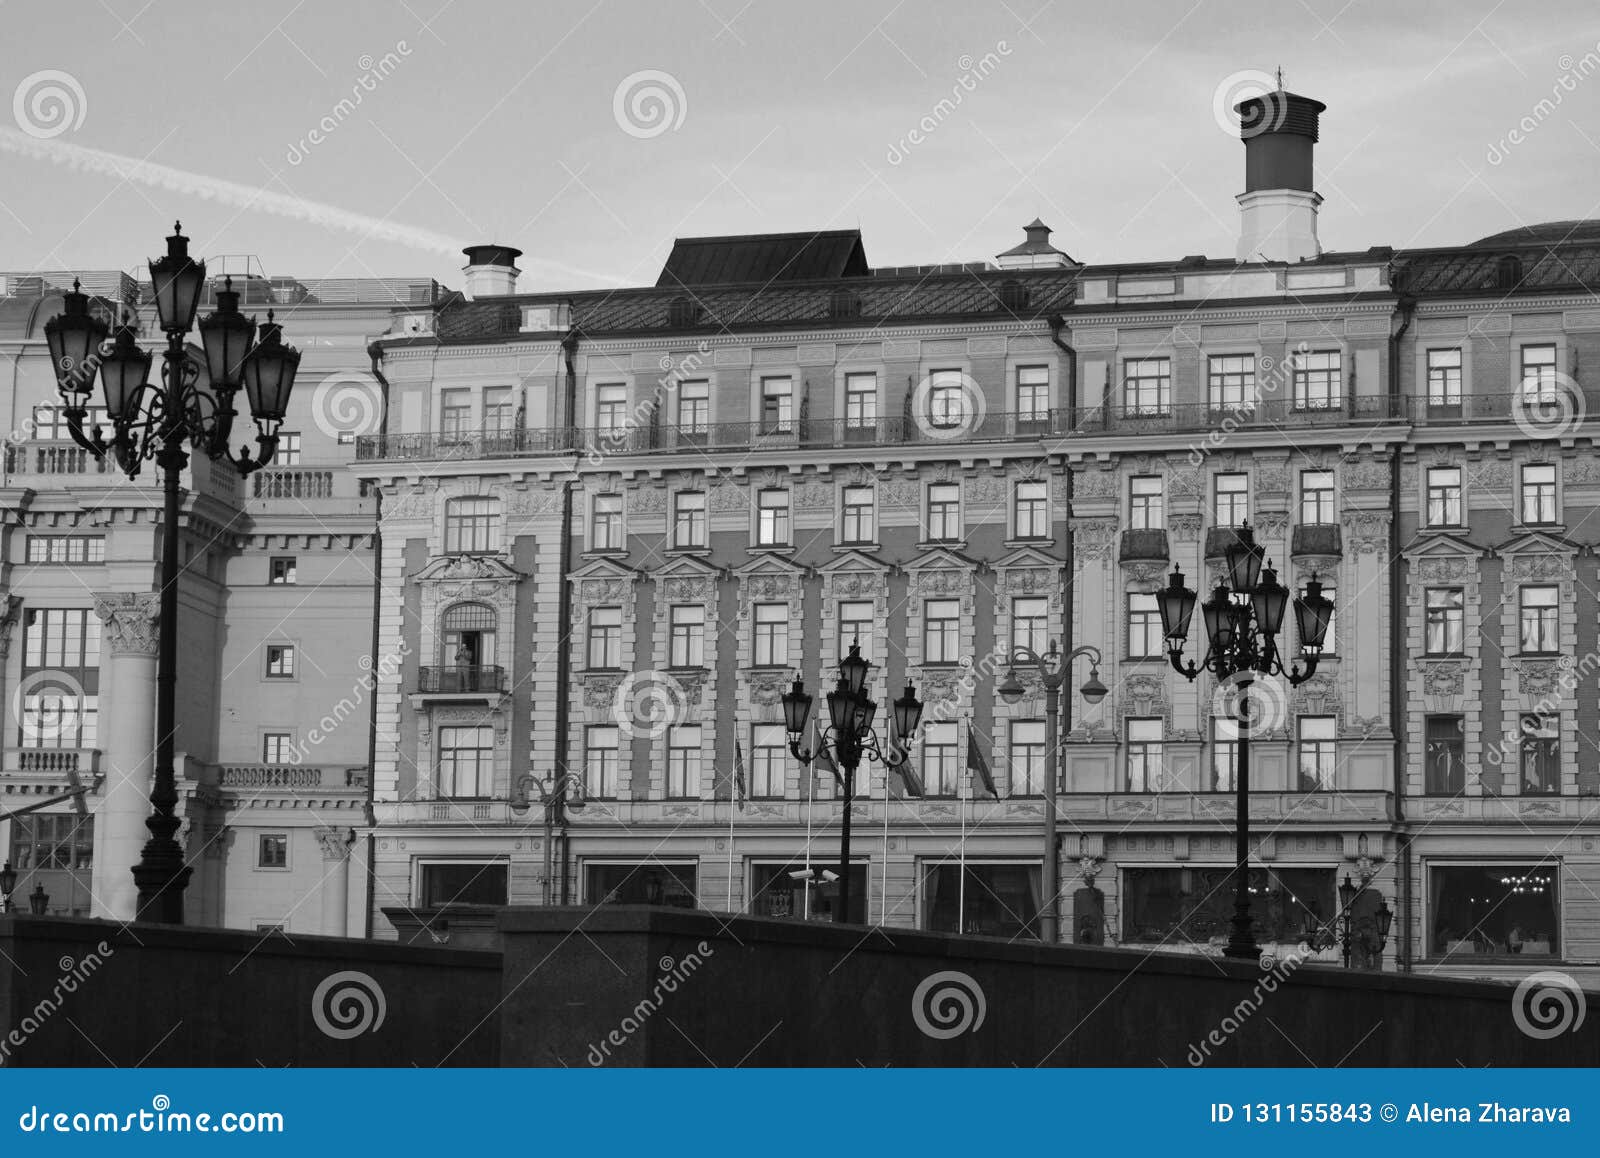 national hotel. the building was built in 1900-1902. the building was repeatedly restored. lenin liv